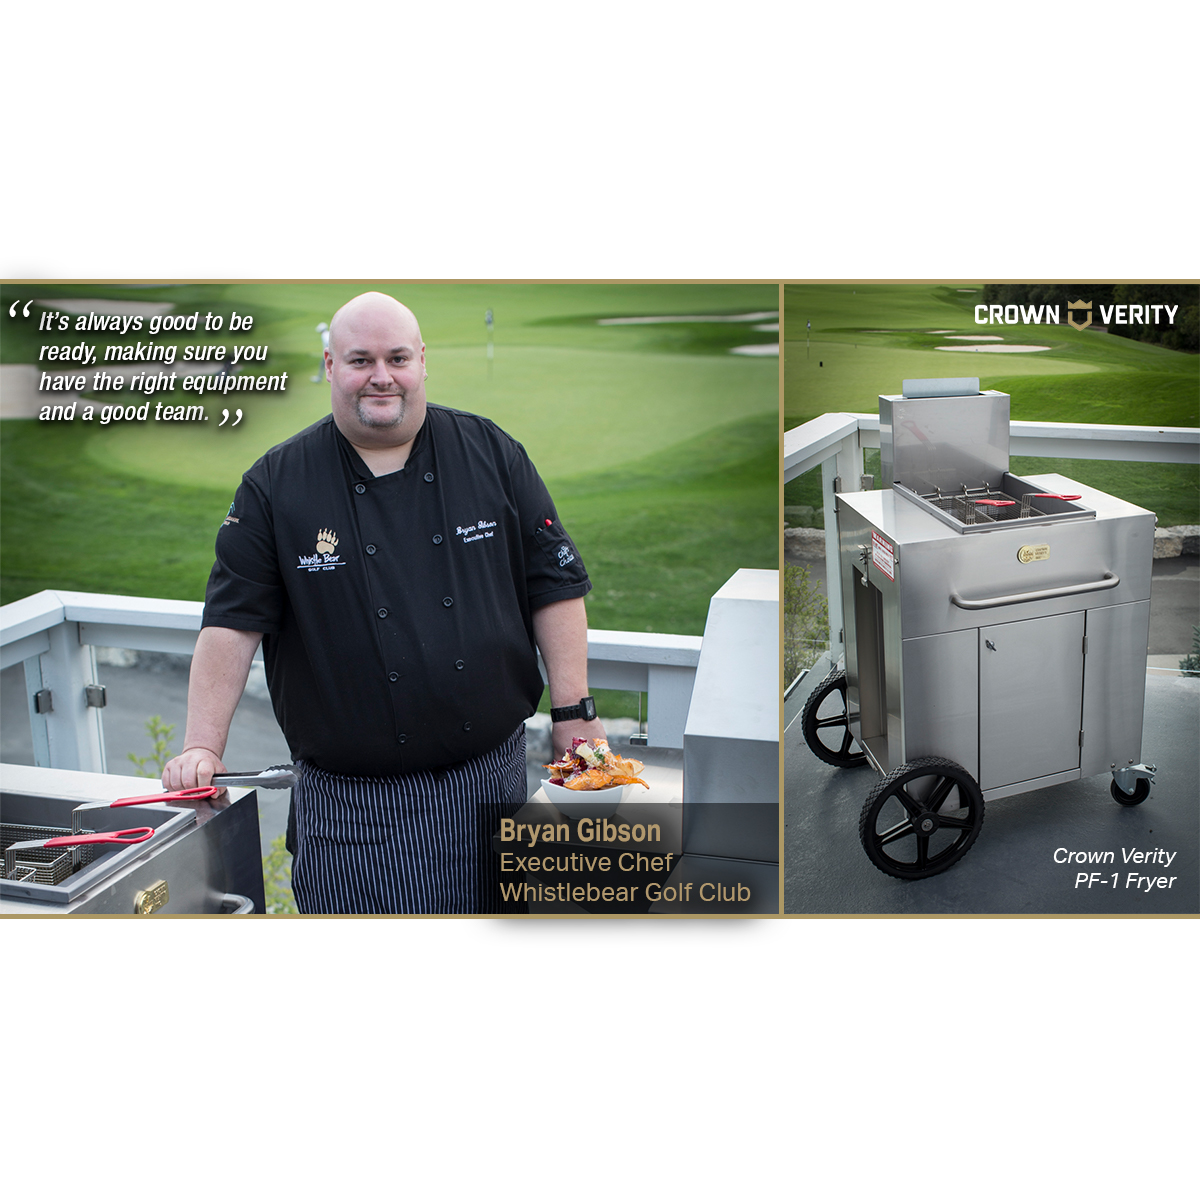 Deluxe Crown Verity Propane Deep Fryer (Requires 30lb propane tank) - THIS ITEM IS DELIVERY ONLY.